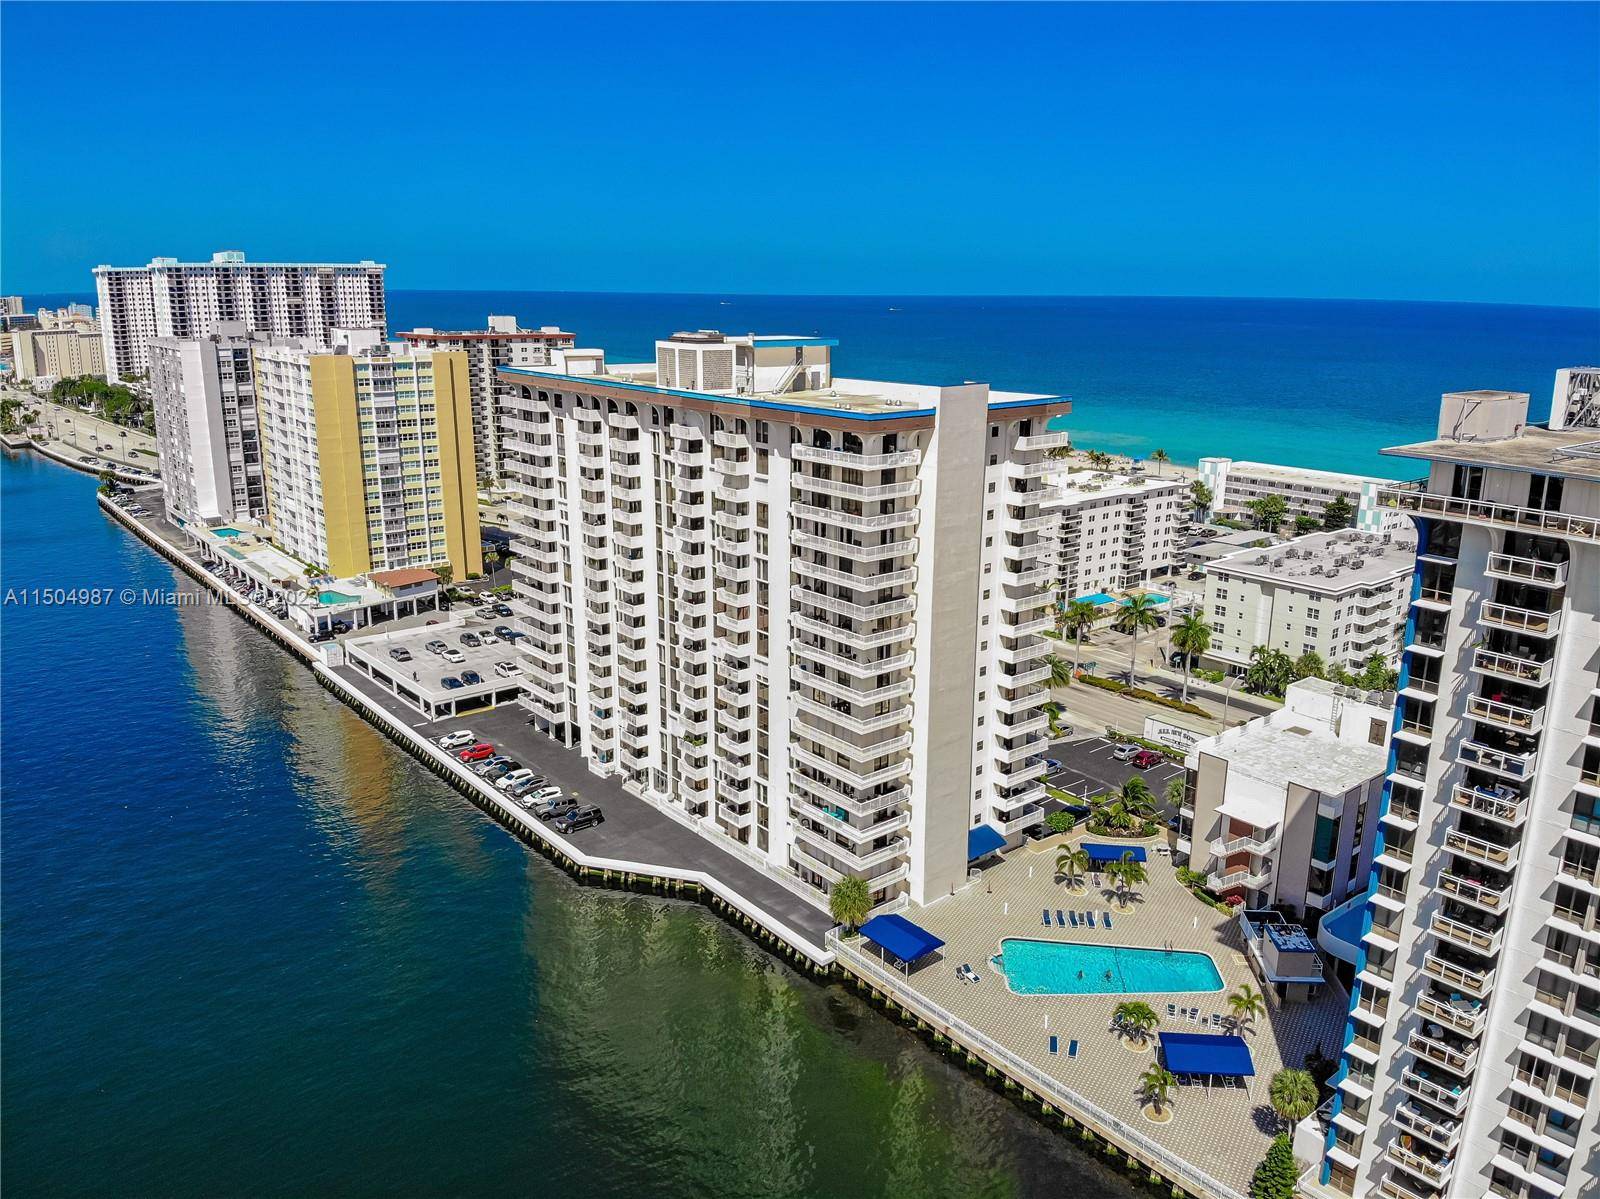 ACROSS THE STREET FROM THE OCEAN BRIGHT AND BEAUTIFUL FULLY RENOVATED 2 BEDROOM 2 BATH UNIT WITH INTERCOSTAL VIEW.